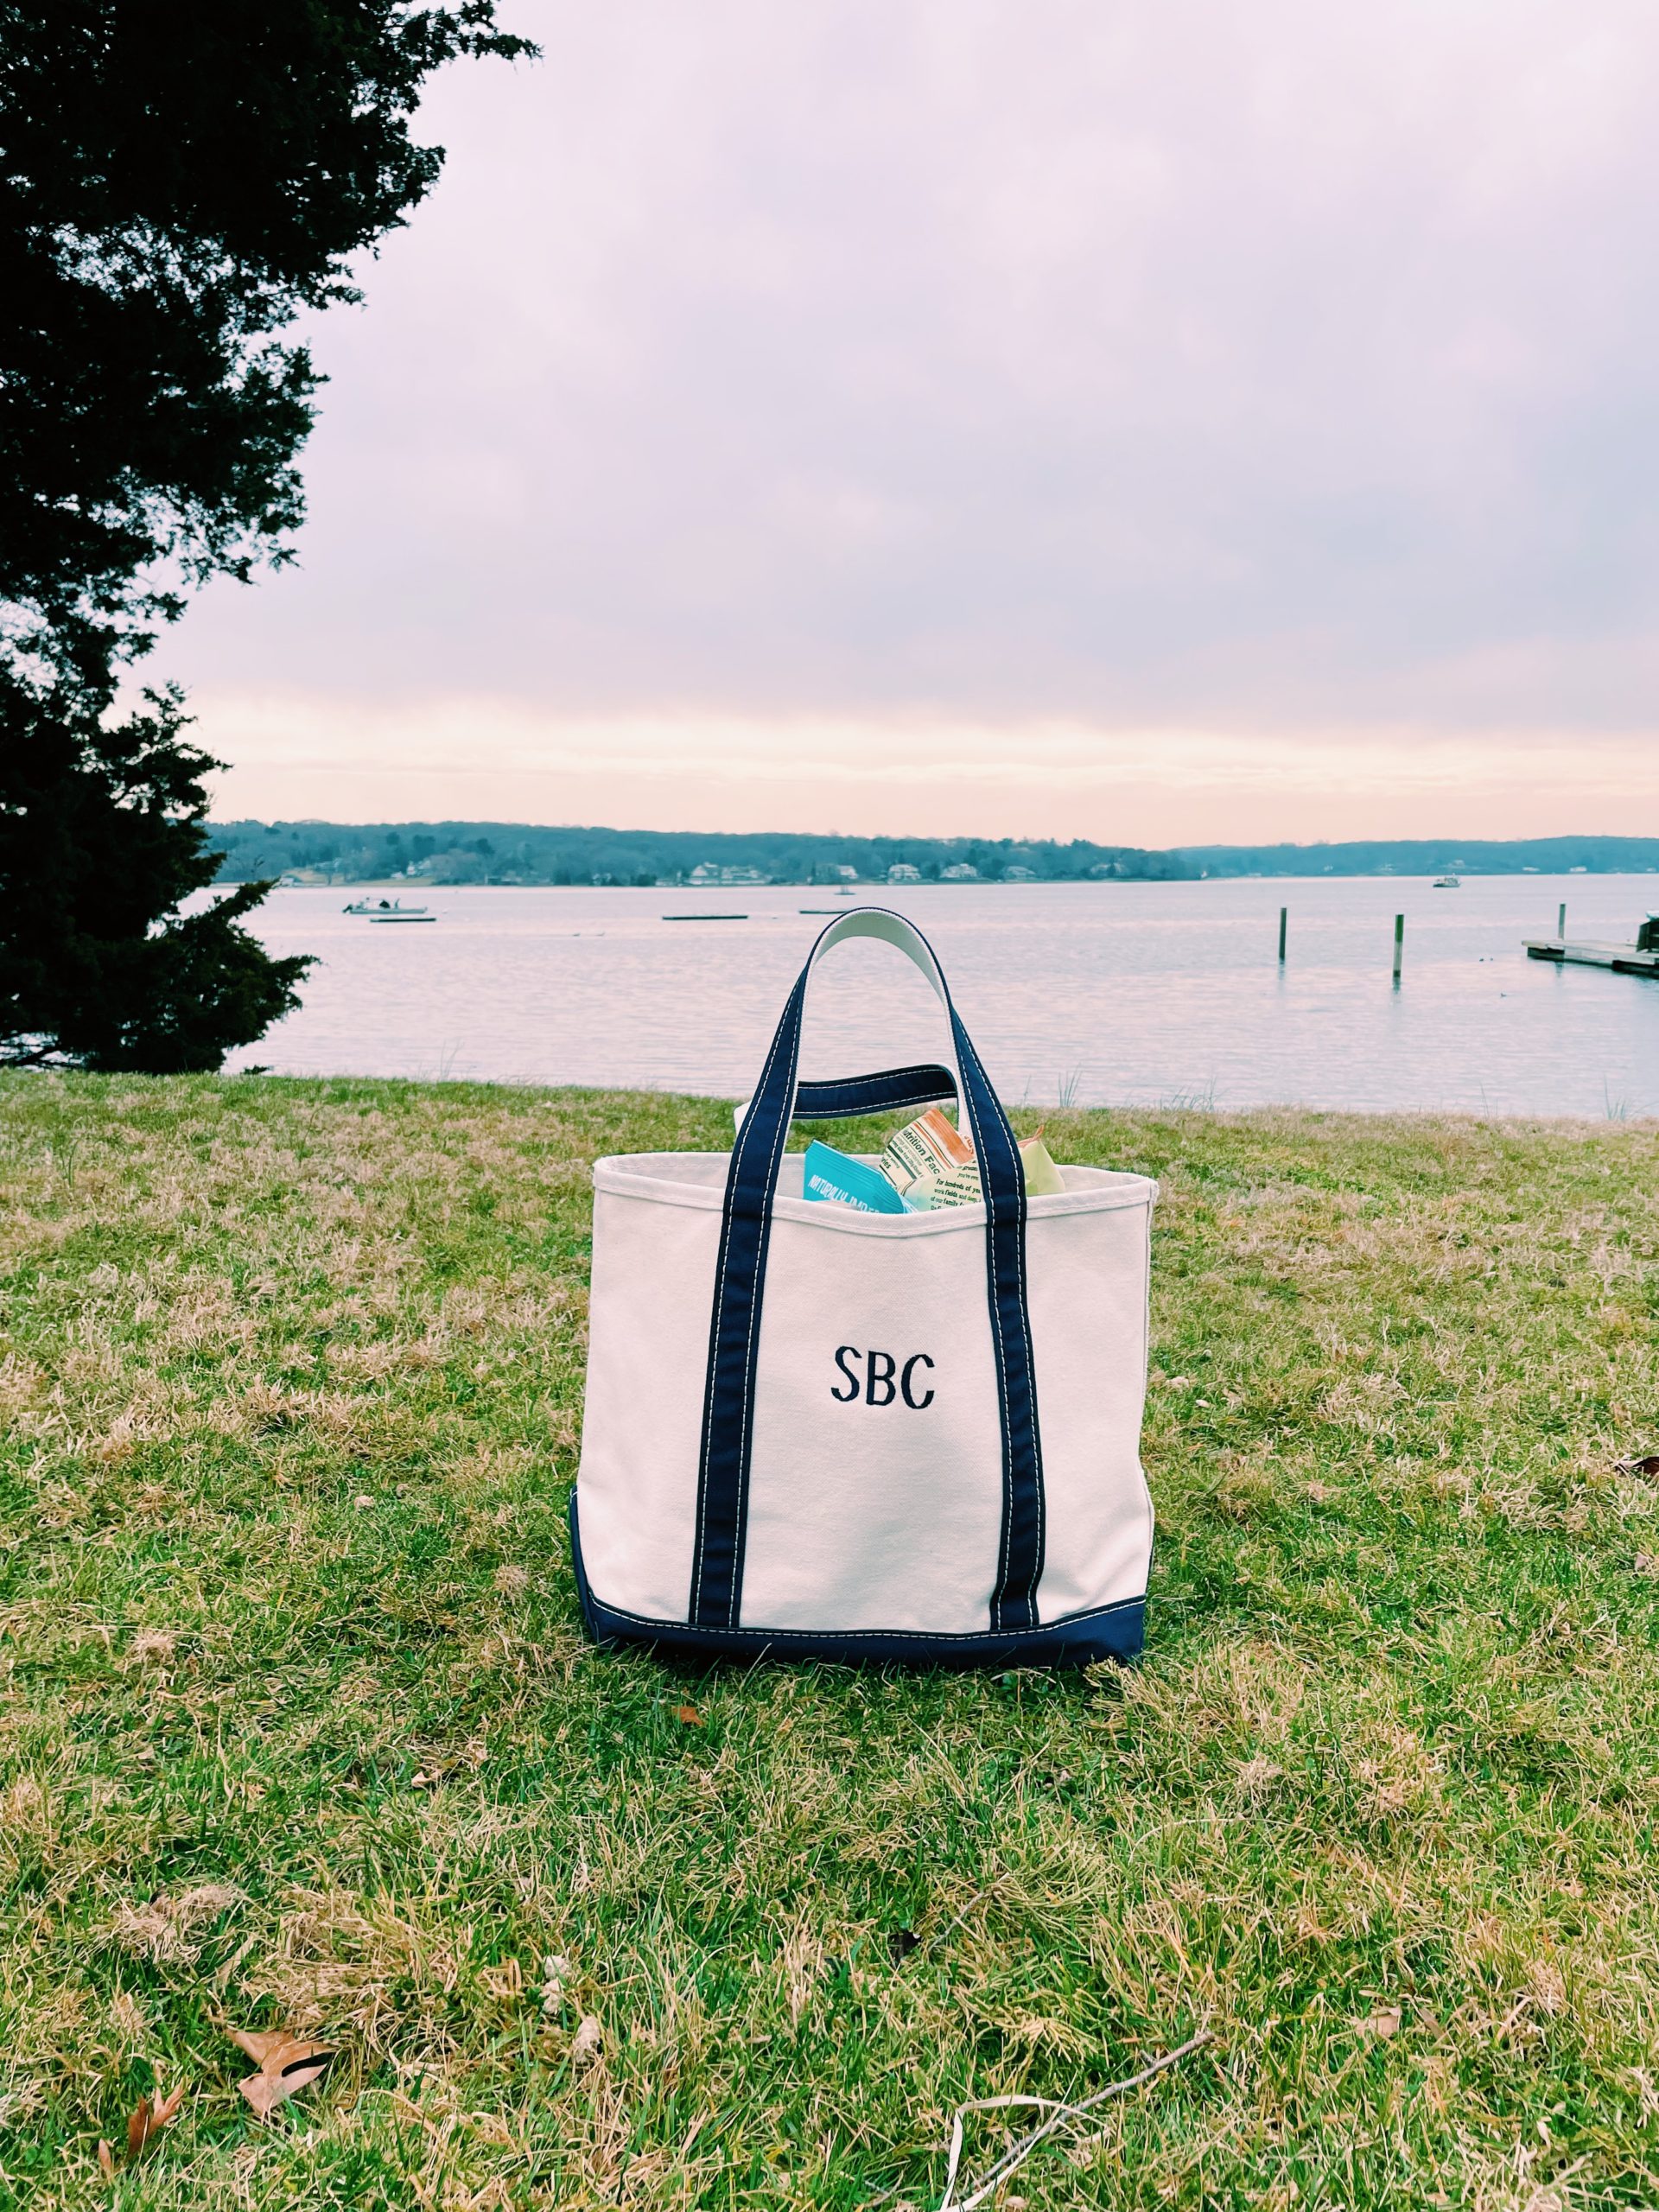 Which Boat & Tote Should You Buy?